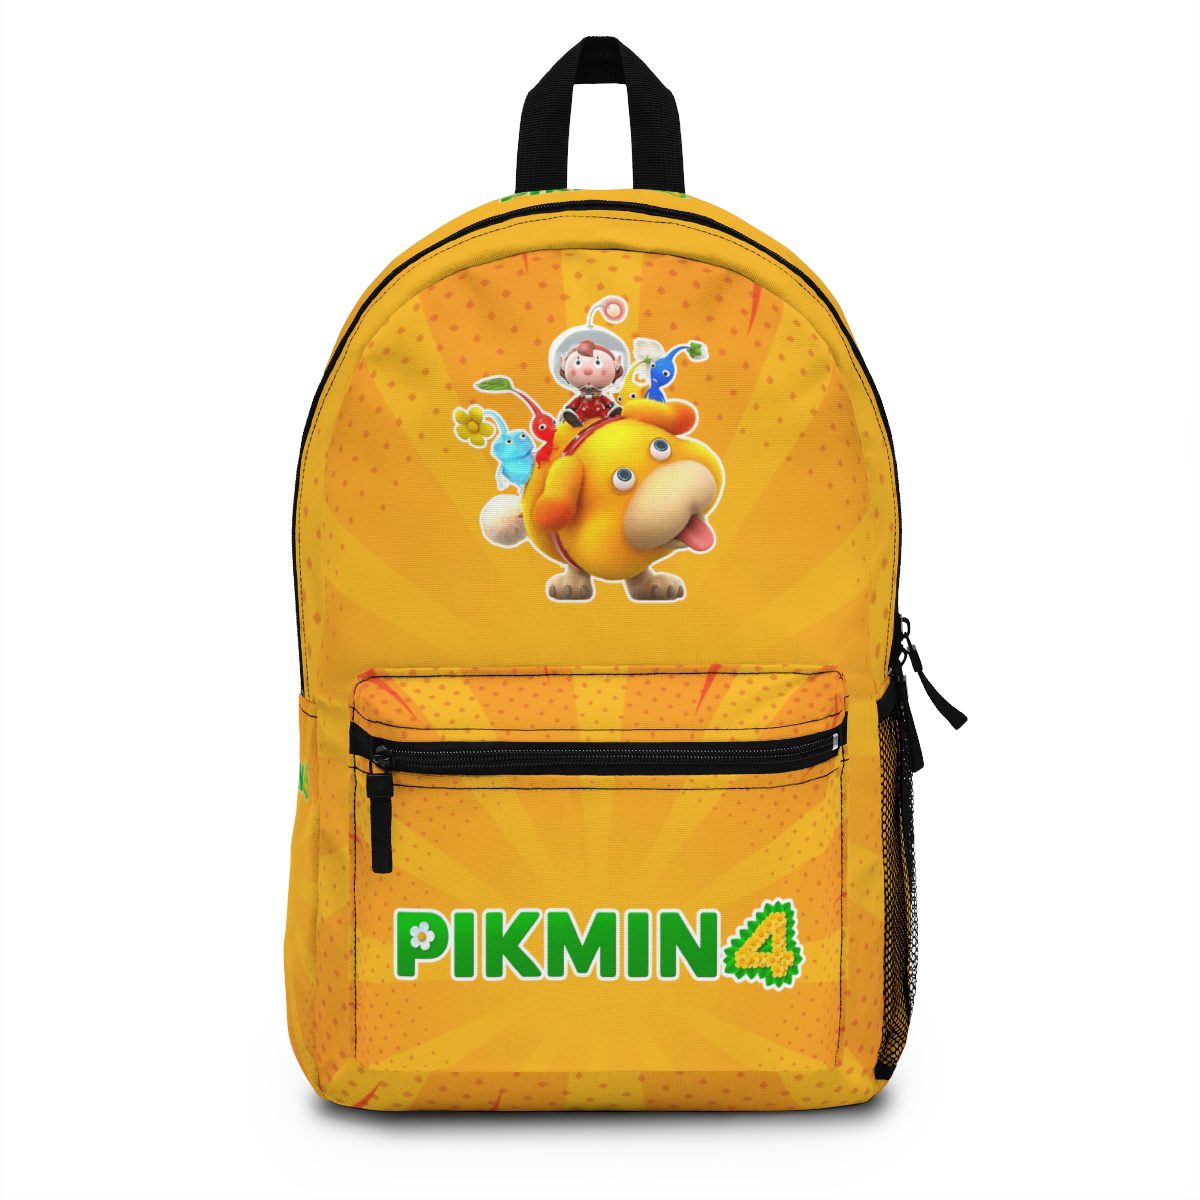 PIKMIN 4 Video Game Yellow Gold Backpack Cool Kiddo 10